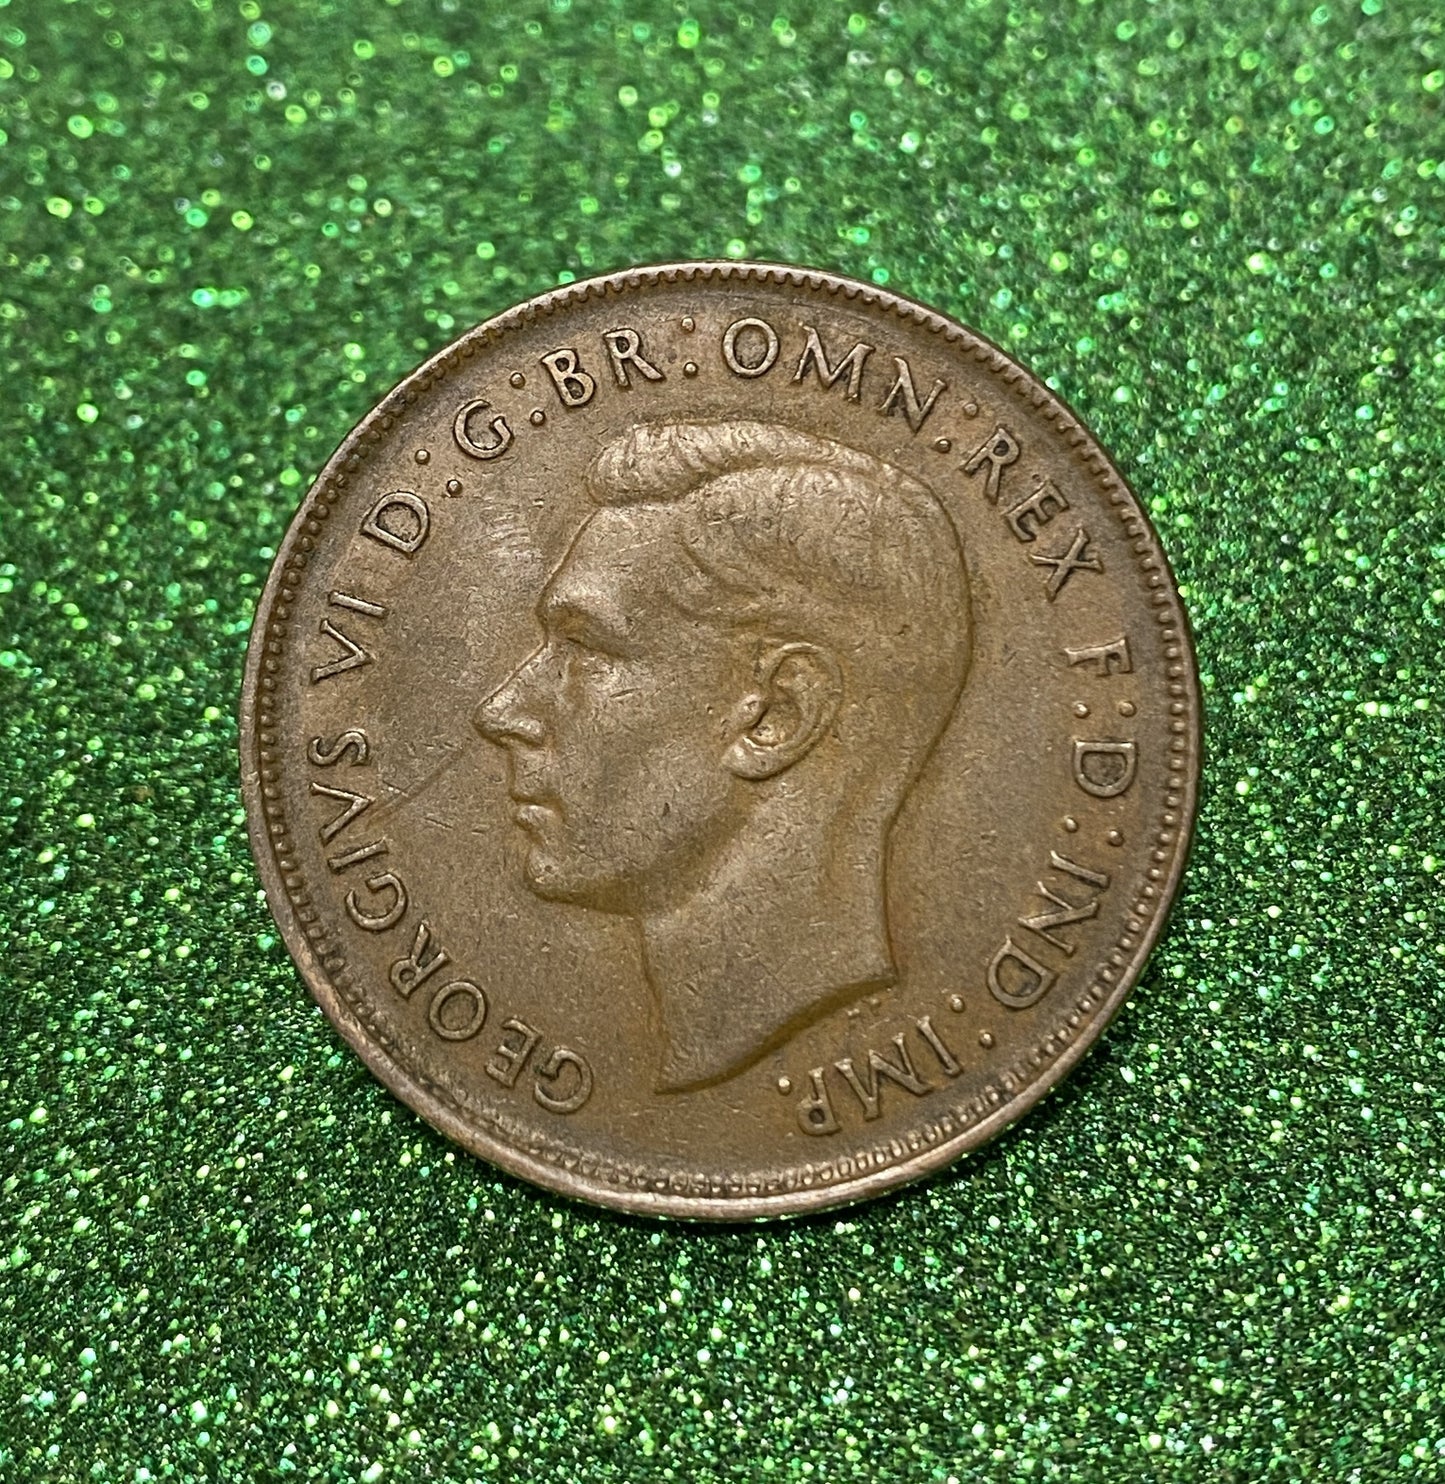 Australian 1 Cent LARGE PENNY COIN 1948 KING GEORGE VI  VG/F CONDITION